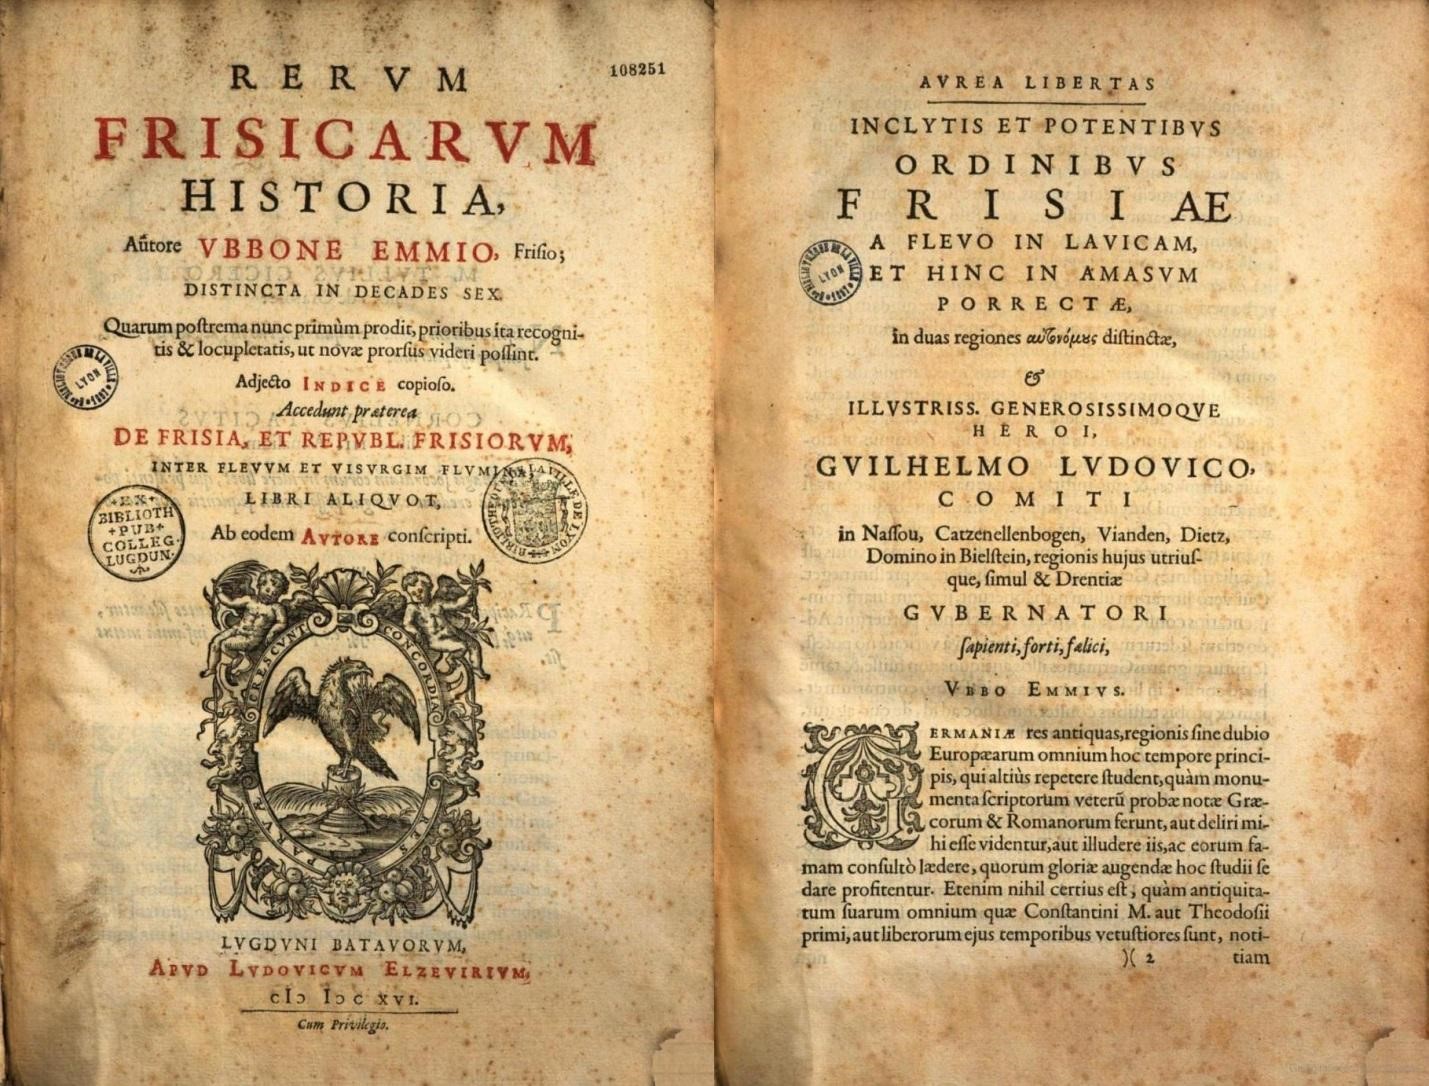 slide 2: The series of books entitled Rerum Frisicarum Historia were Emmius’ life’s work. These two pages are from one of these books. The complete series con-sisted of sixty books, published between 1592 and 1616. When he started work-ing on his Rerum Frisicarum Historia, Emmius had not yet made a name for himself as a scholar. In the first published issues or ‘decades’ of his work, he challenged the scholarly establishment for their historical laxity and leeway with the truth.